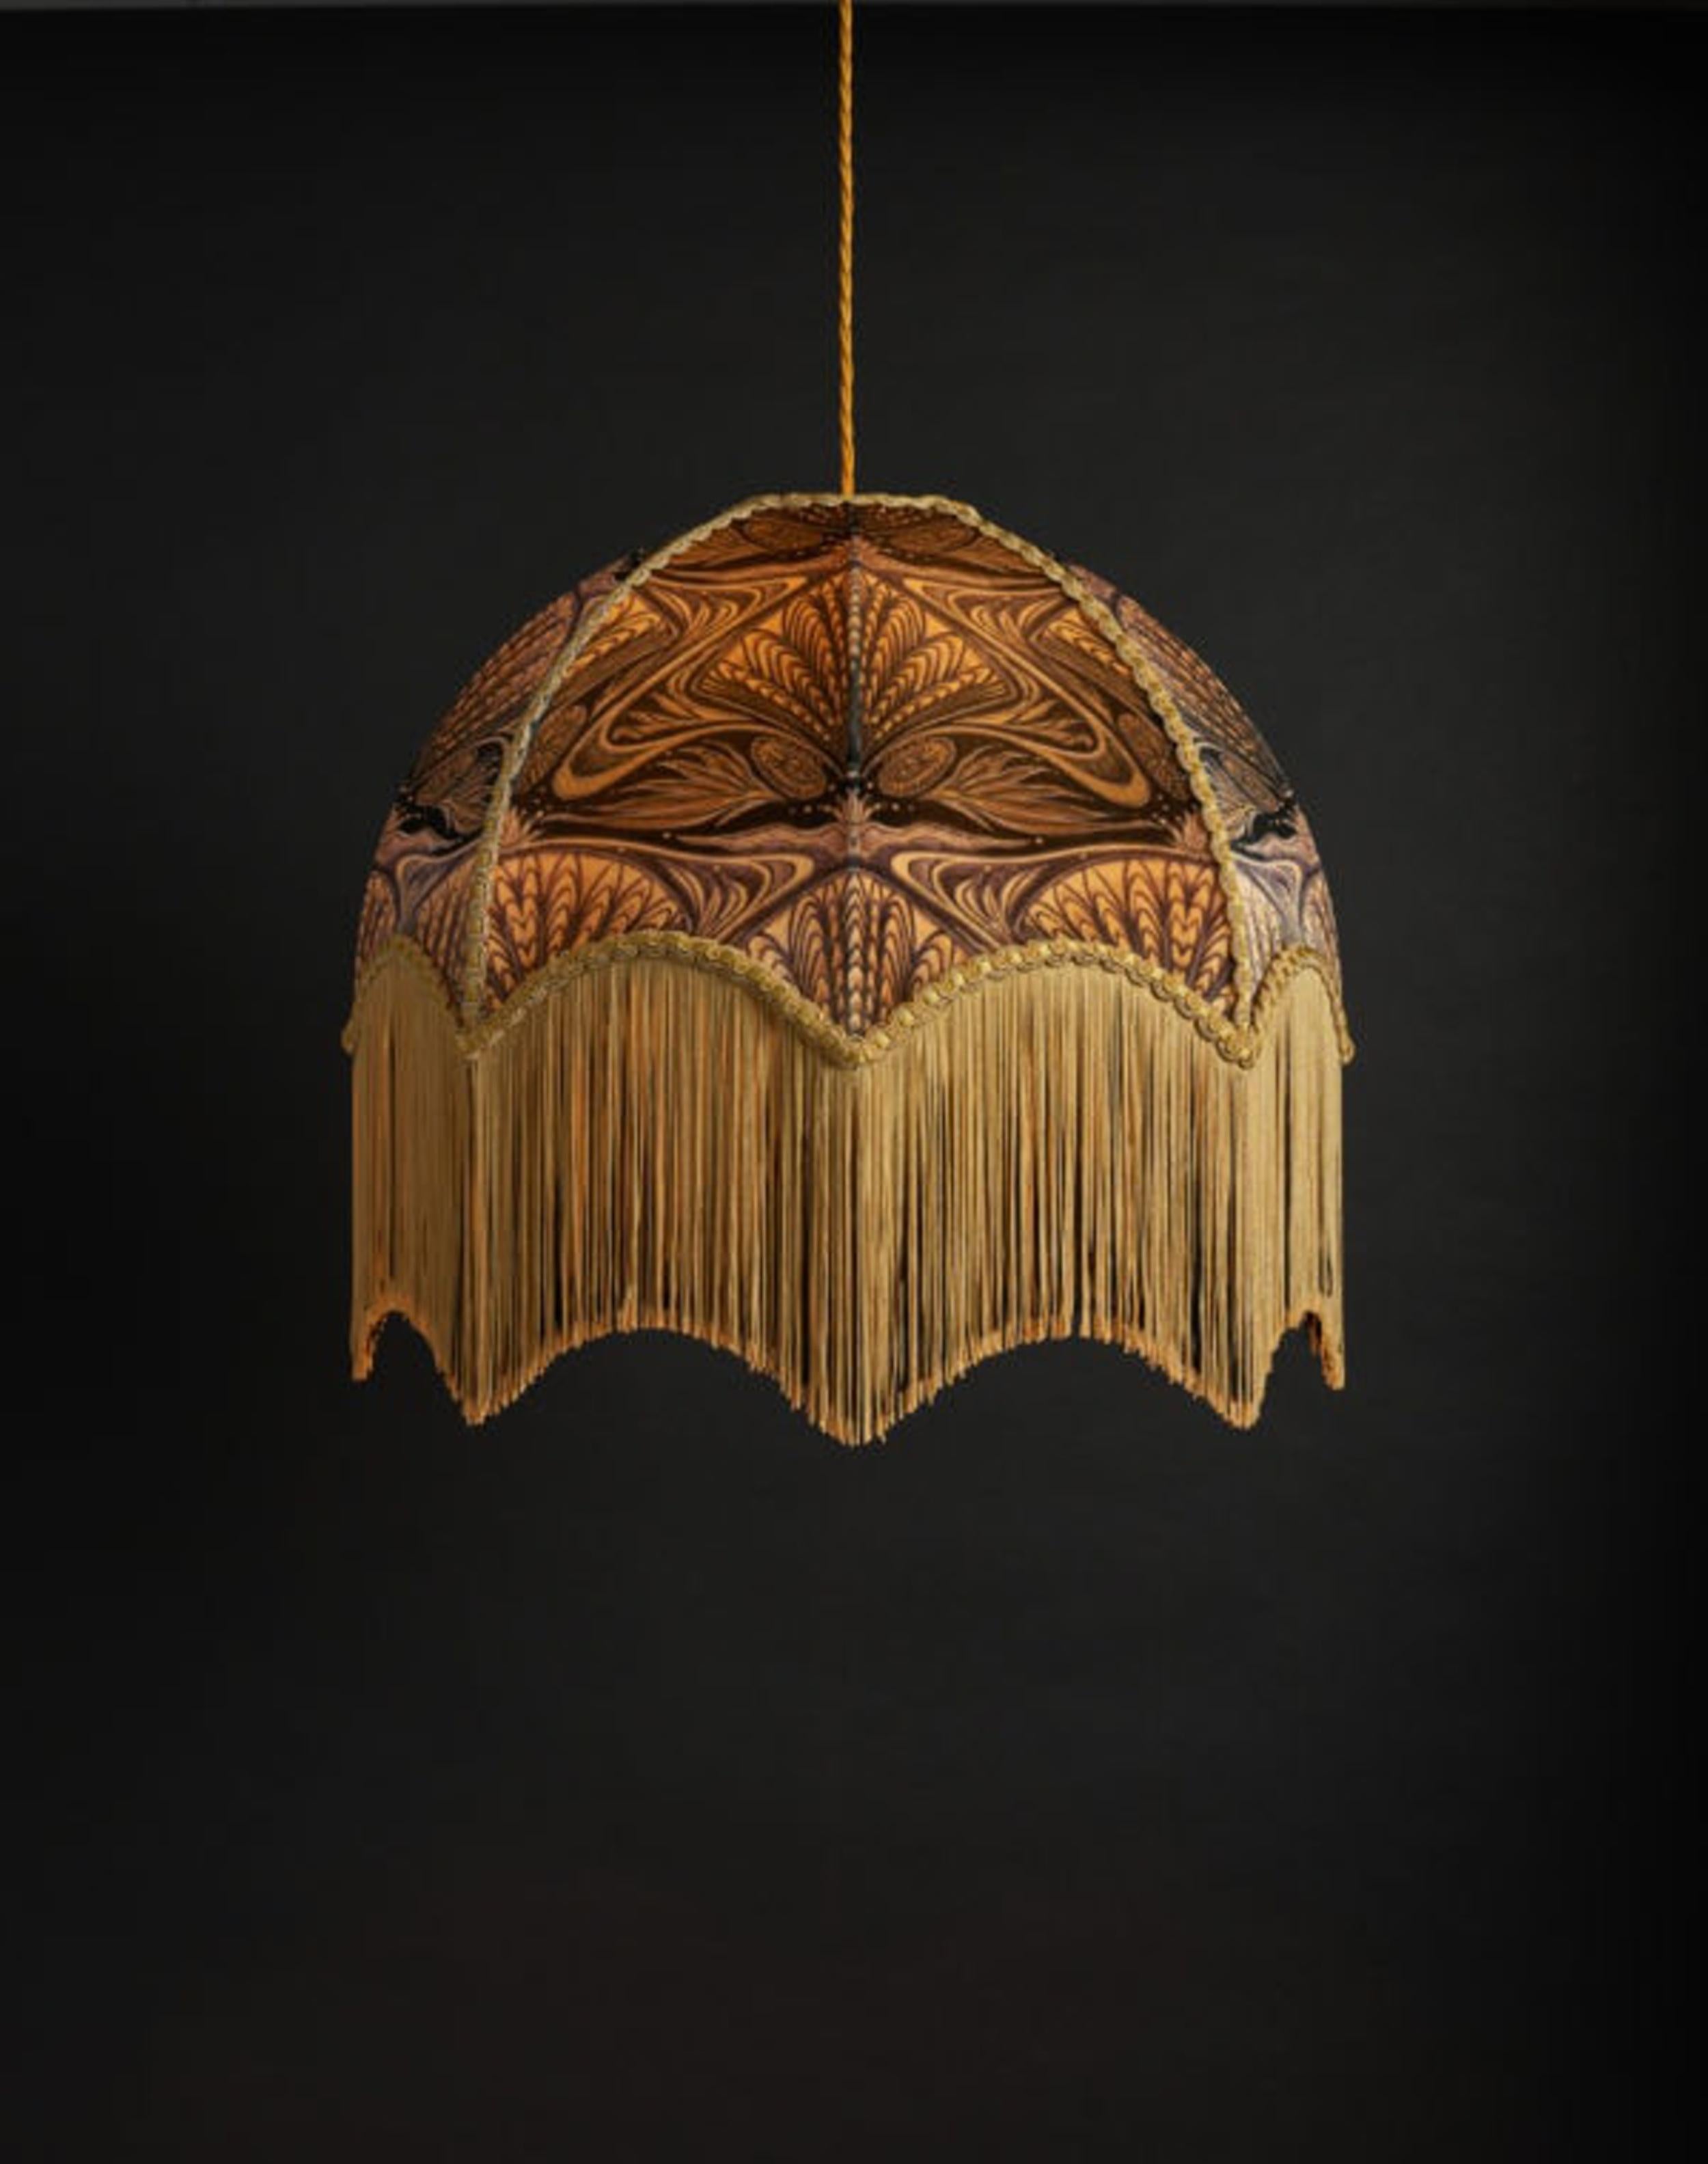 Oyster is our Art Nouveau inspired design, with an intricate and complex pattern in golds, soft blacks and a slightly purplish hue.

Anna Hayman lampshades create a fantastic centrepiece to a room and work as well on a lamp base as they do as